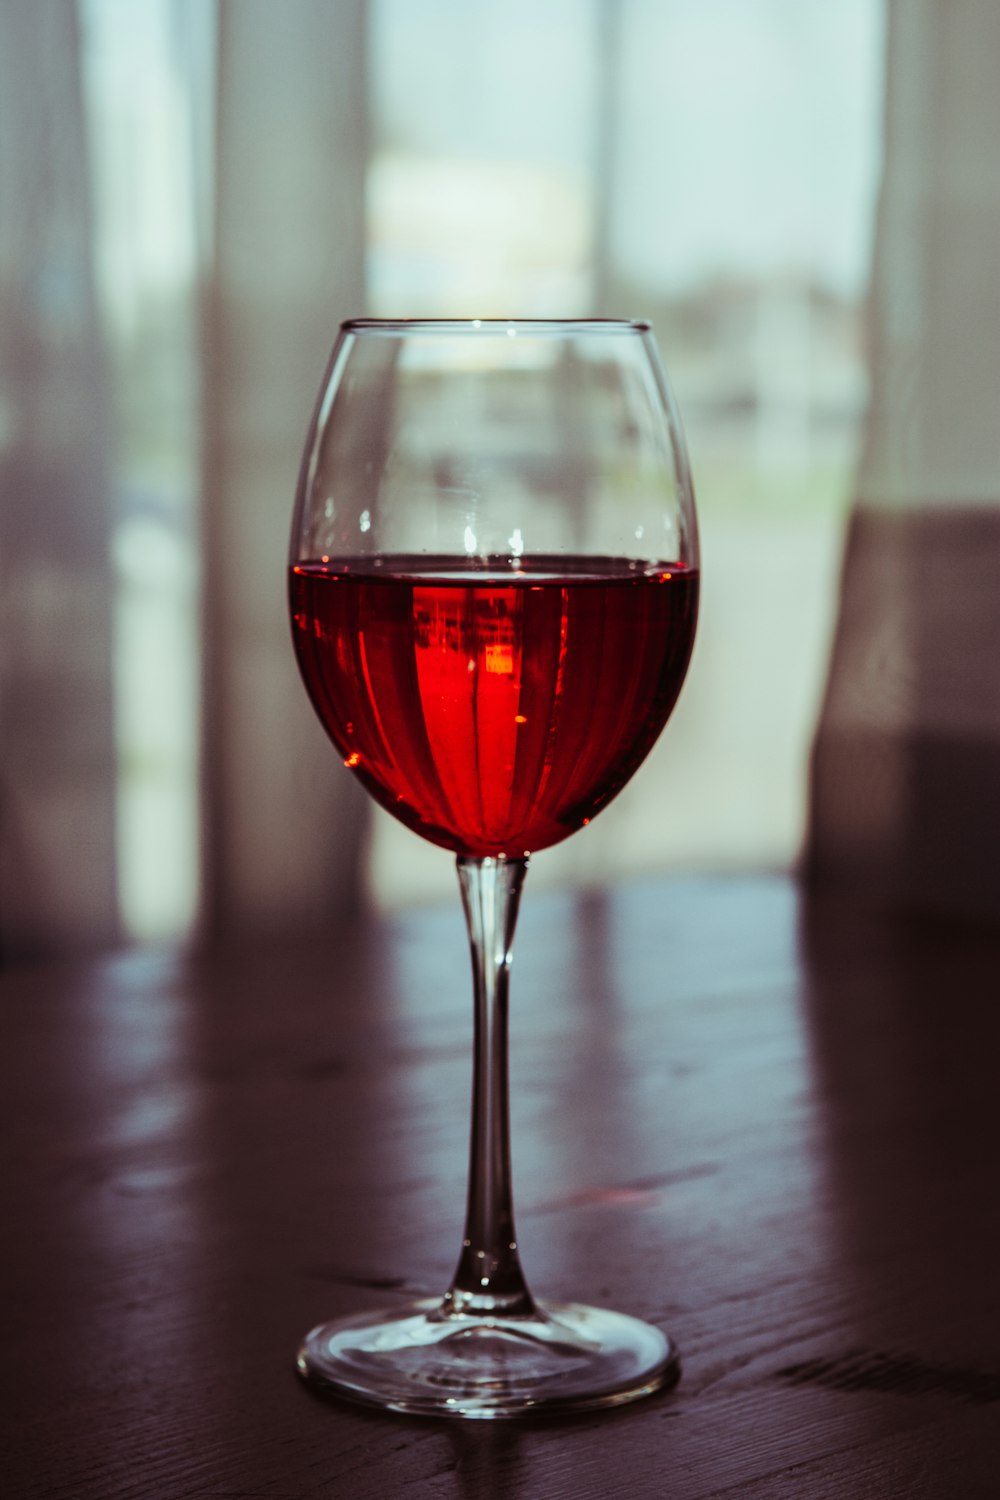 350+ Wine Glass Pictures  Download Free Images & Stock Photos on